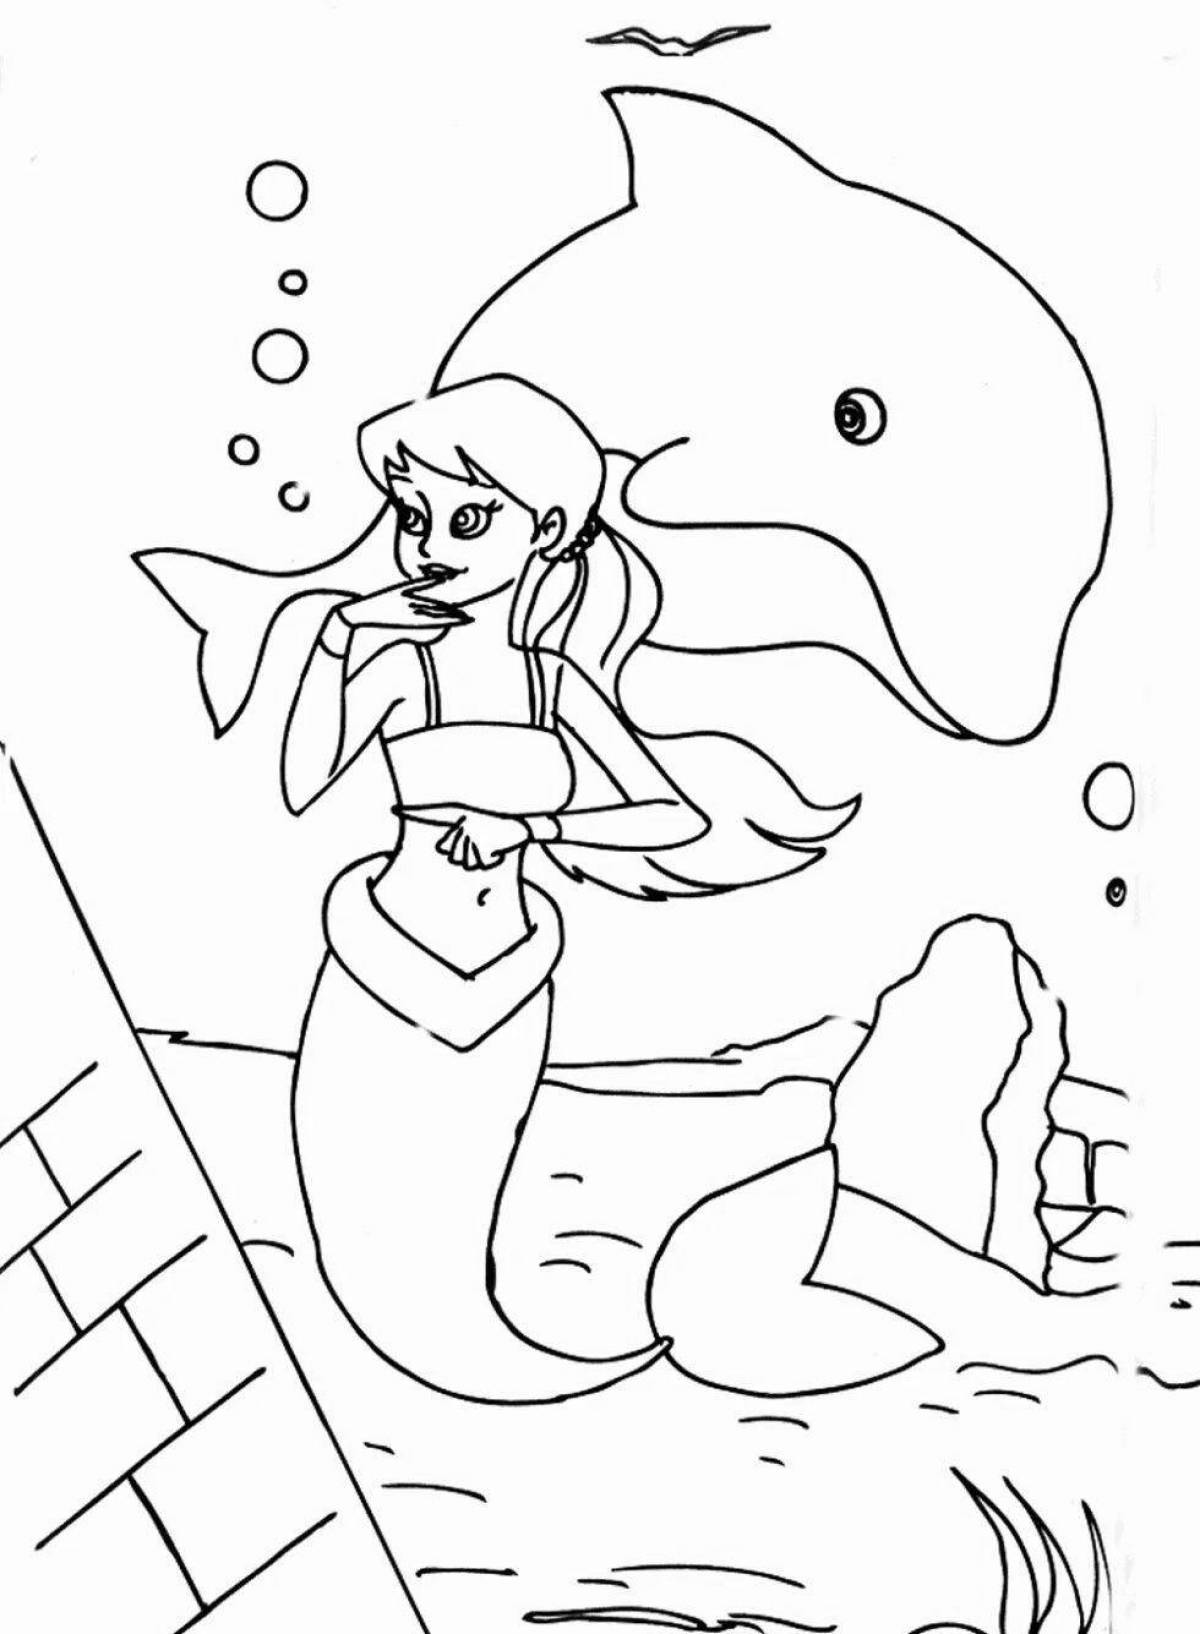 Poetic coloring mermaid and dolphin